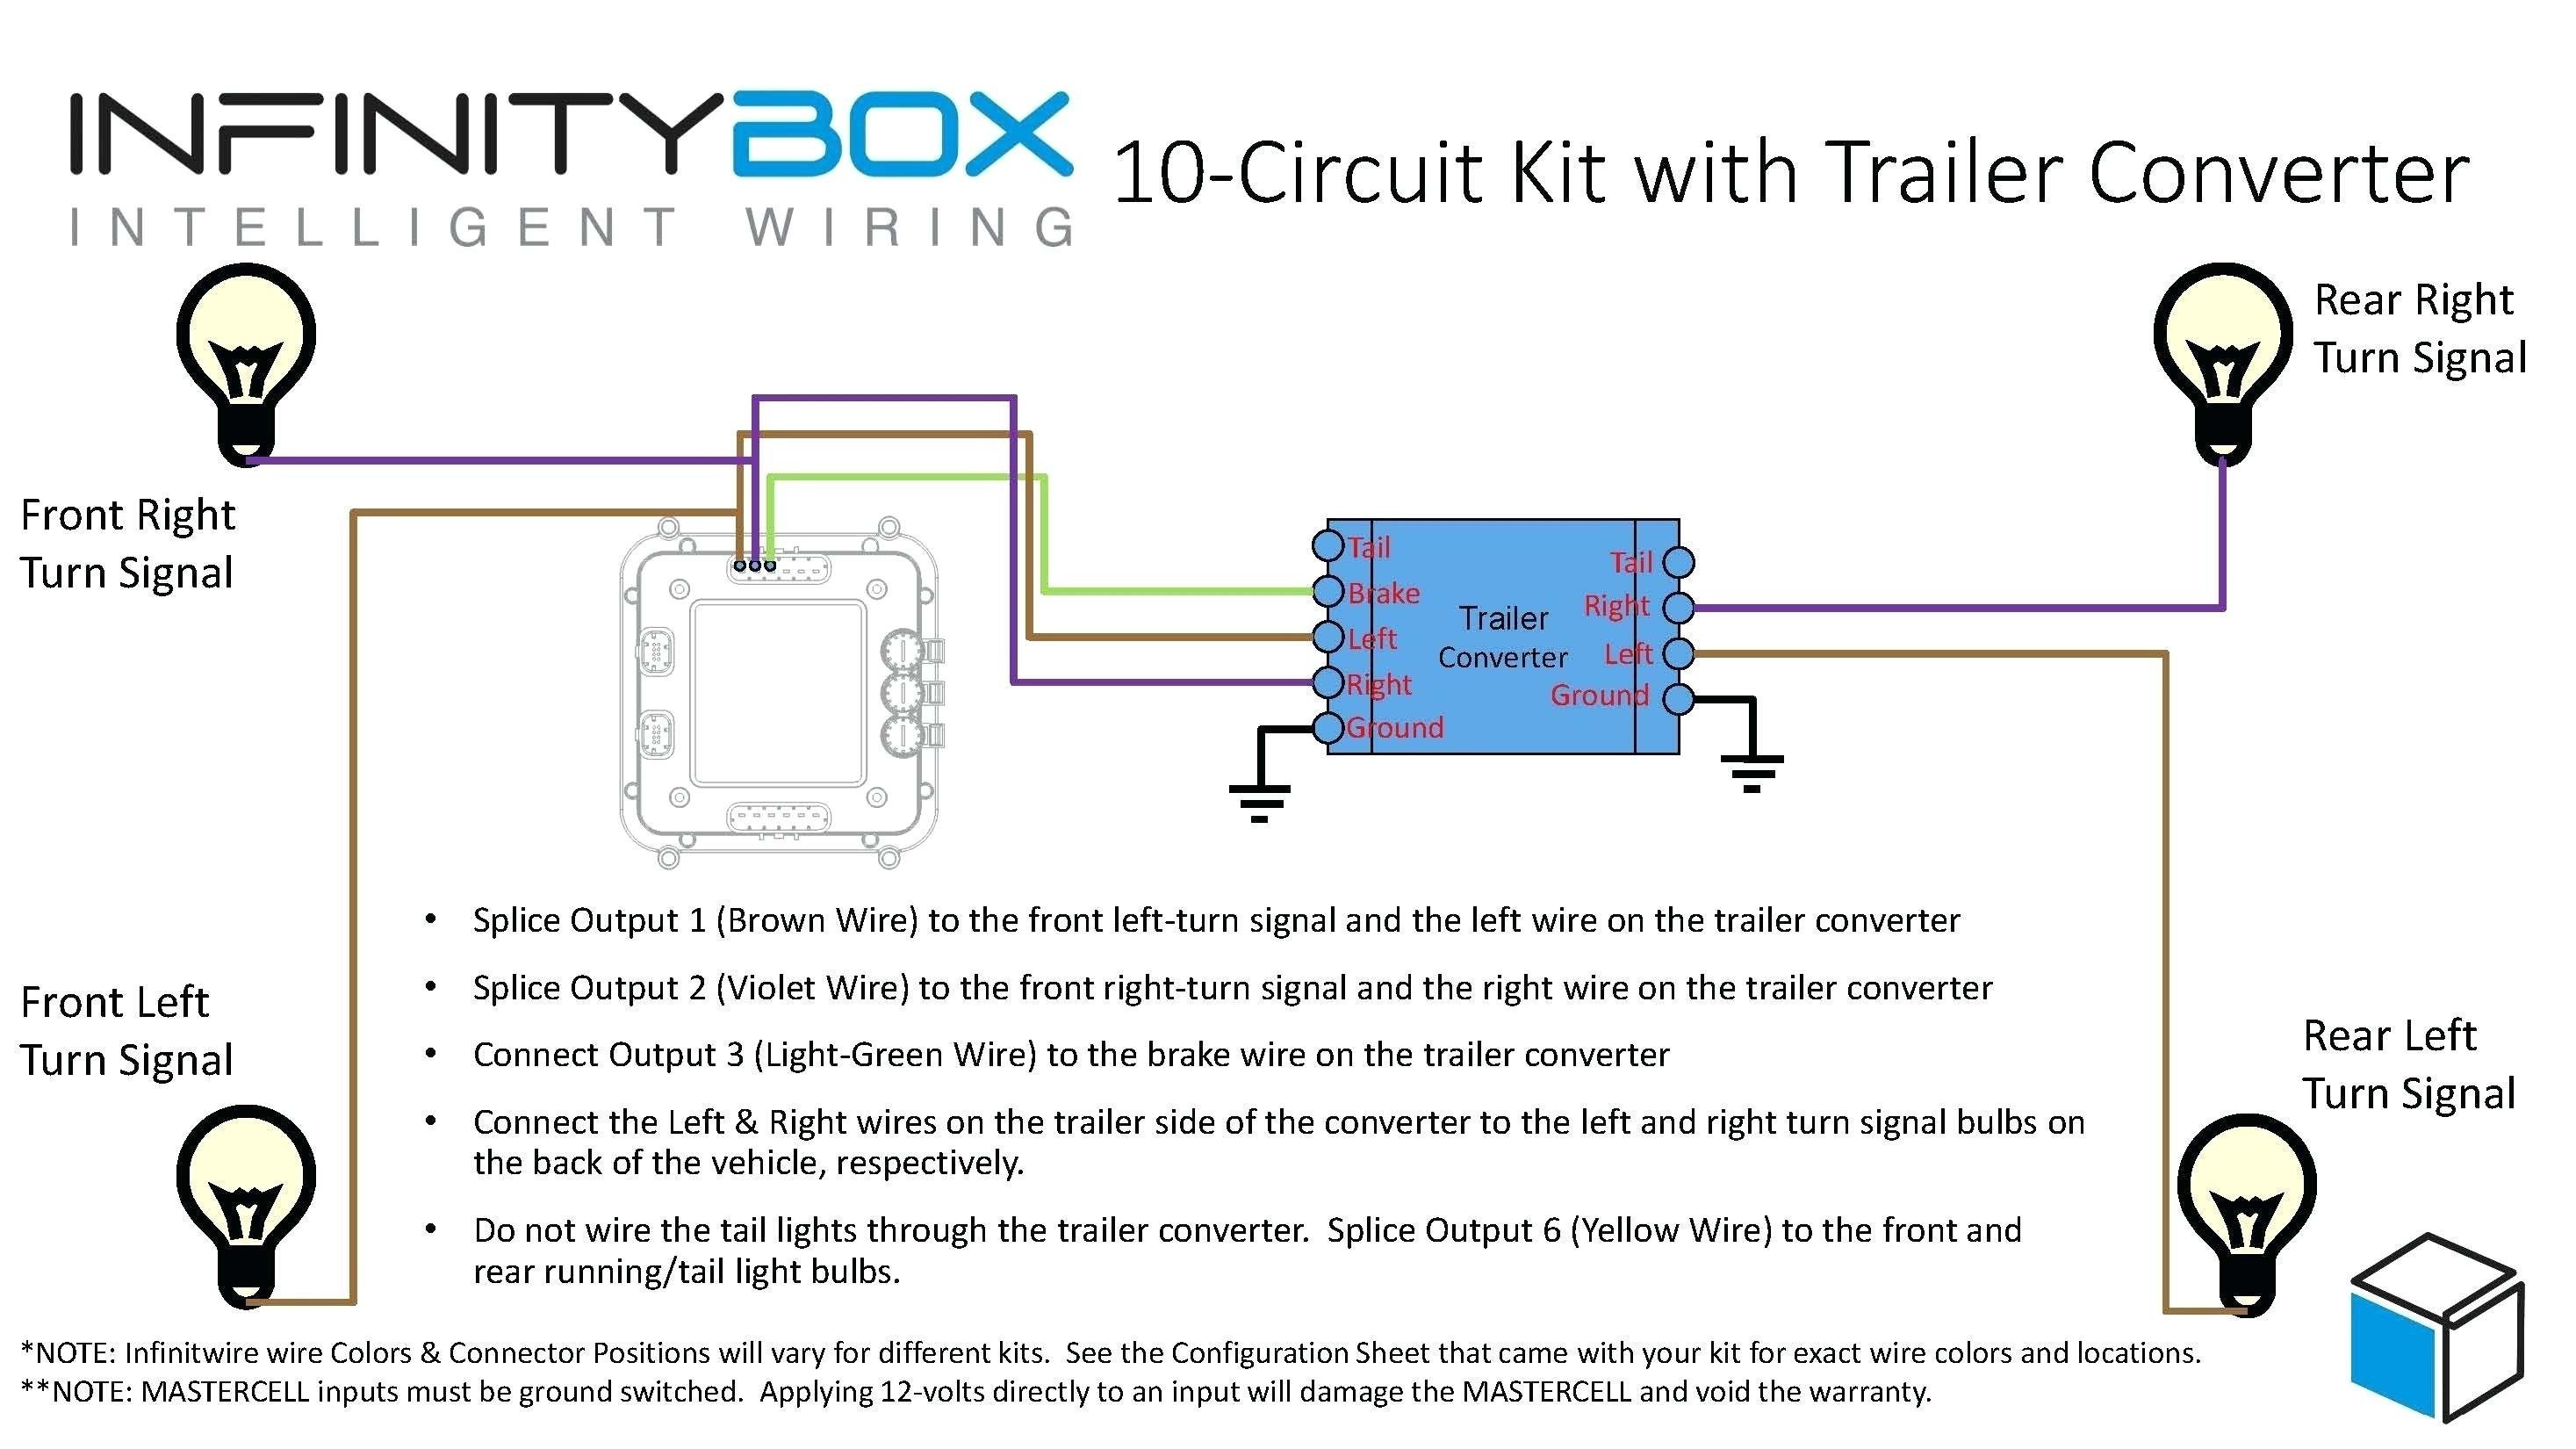 Trailer Wiring Diagram Running Lights Inspirationa Wiring Diagram for Running Lights New Wiring Diagrams for Utility